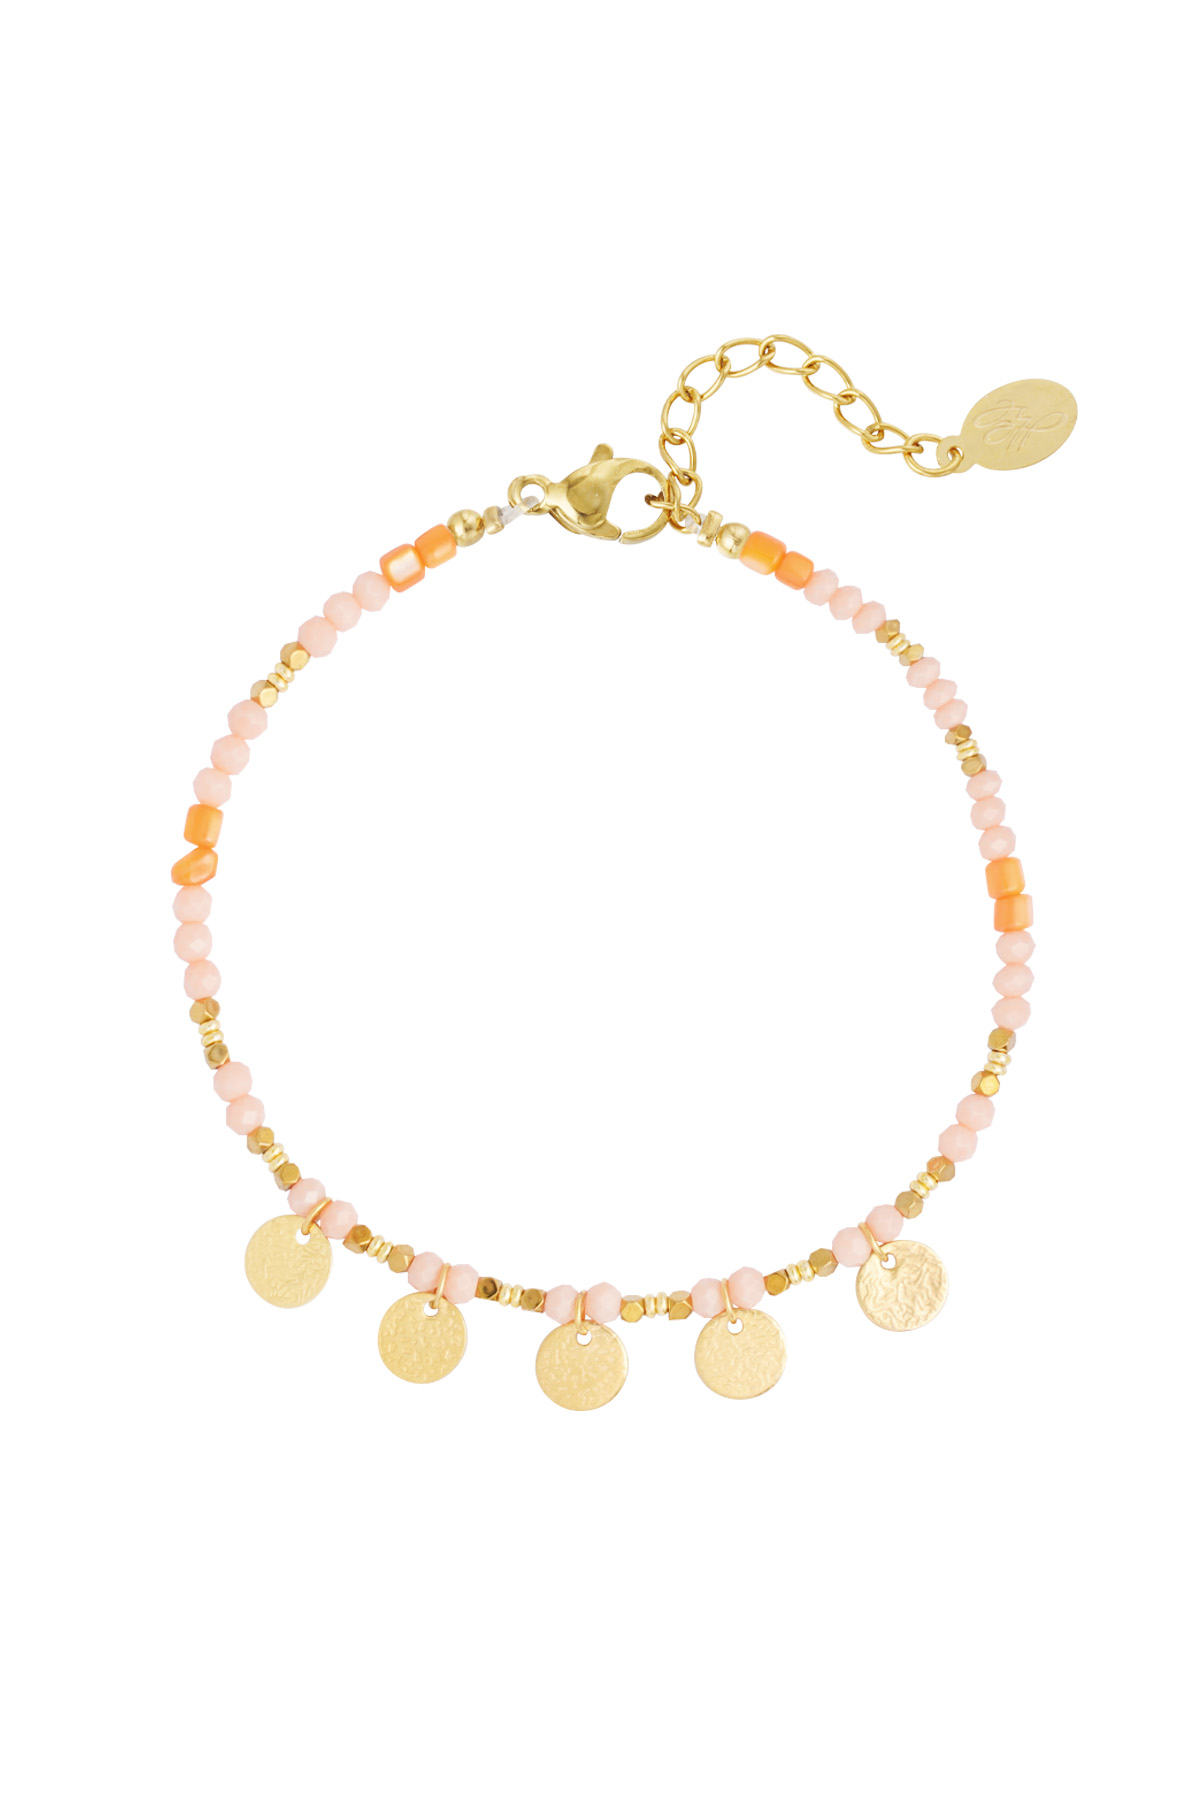 Anklet with coin charms - orange/gold h5 